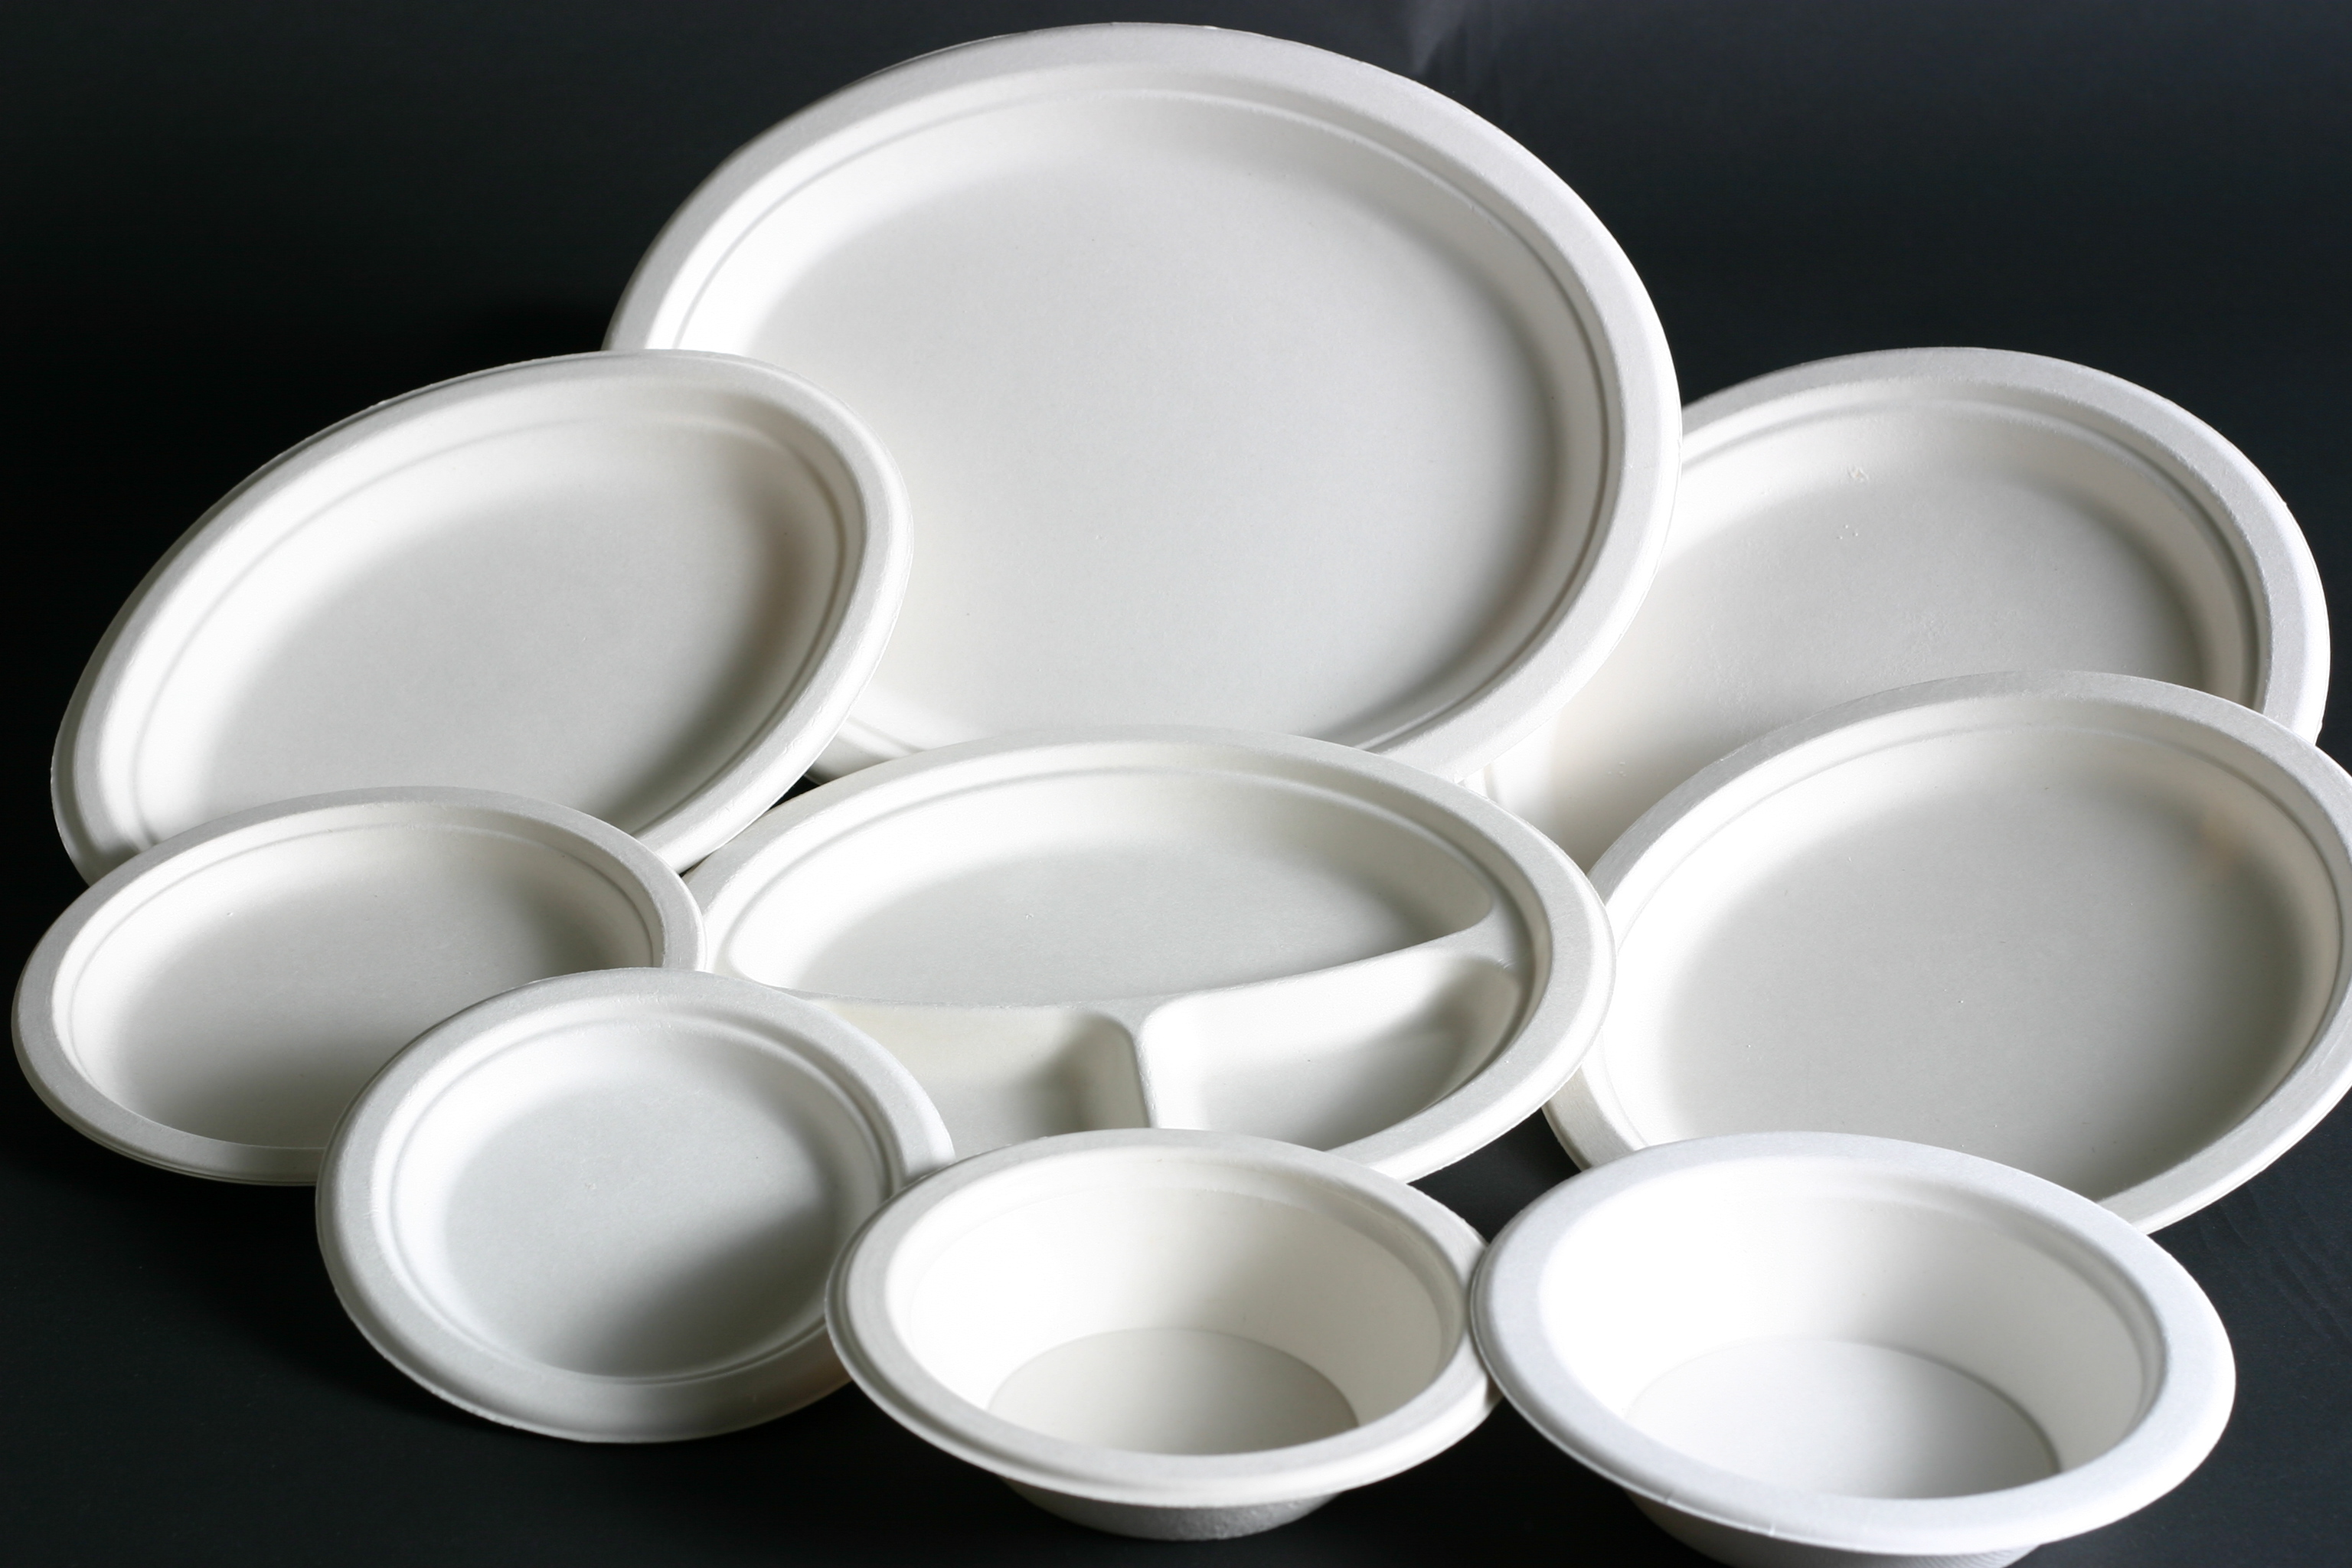 France to Ban Plastic Dishes by 2020, Decision Stirs Controversy